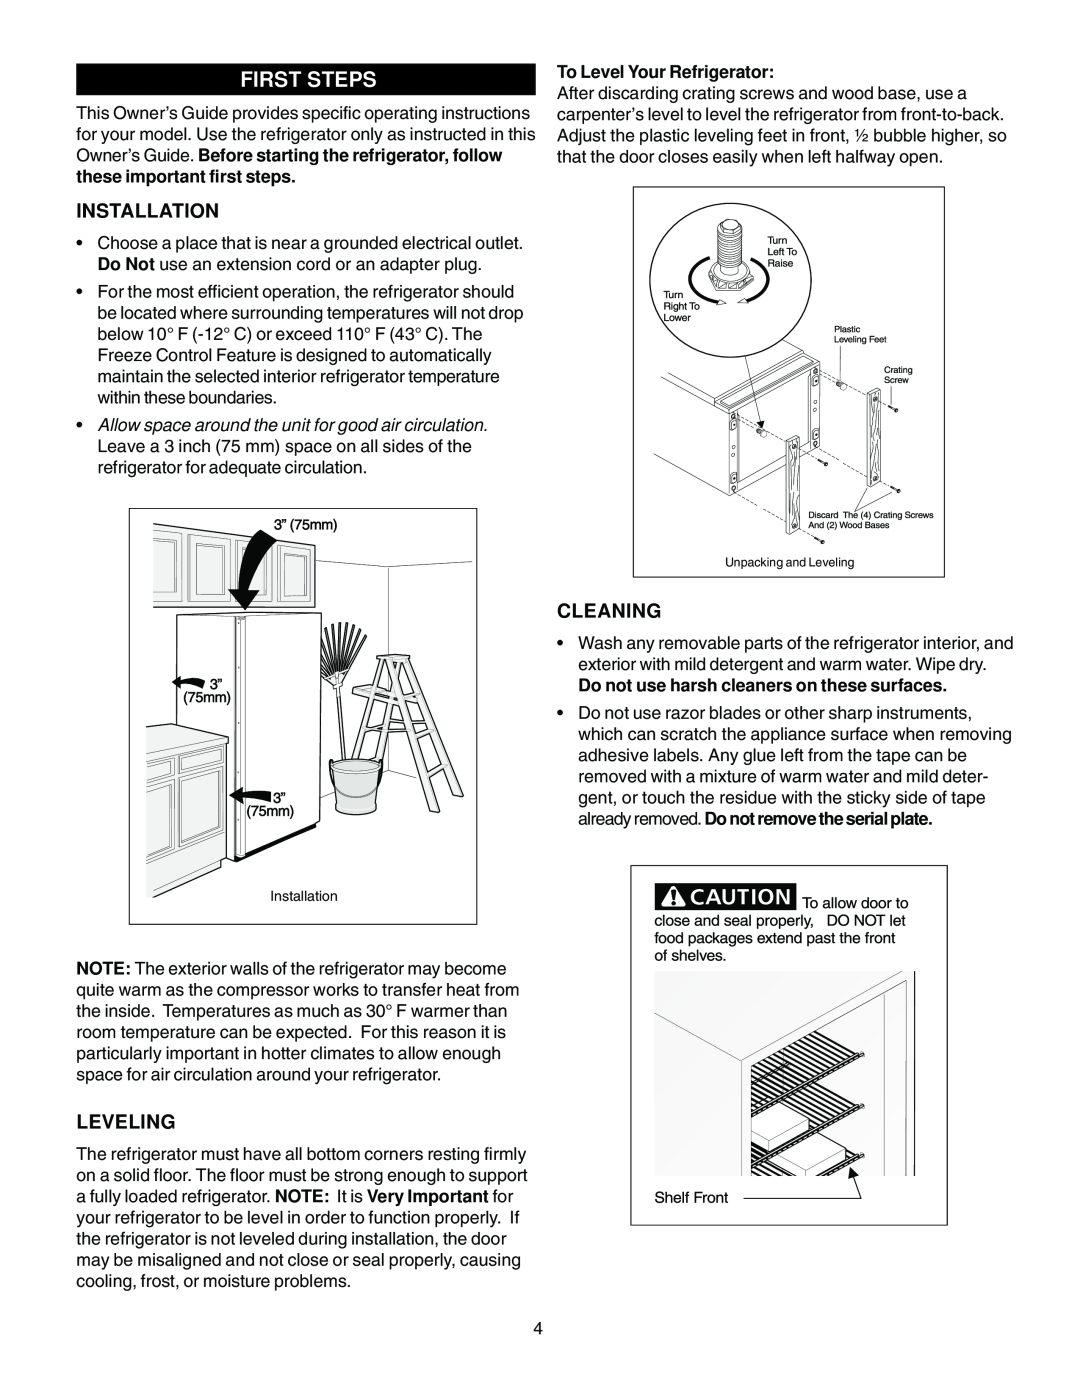 Electrolux - Gibson 216771000 manual First Steps, Installation, Leveling, Cleaning, To Level Your Refrigerator 